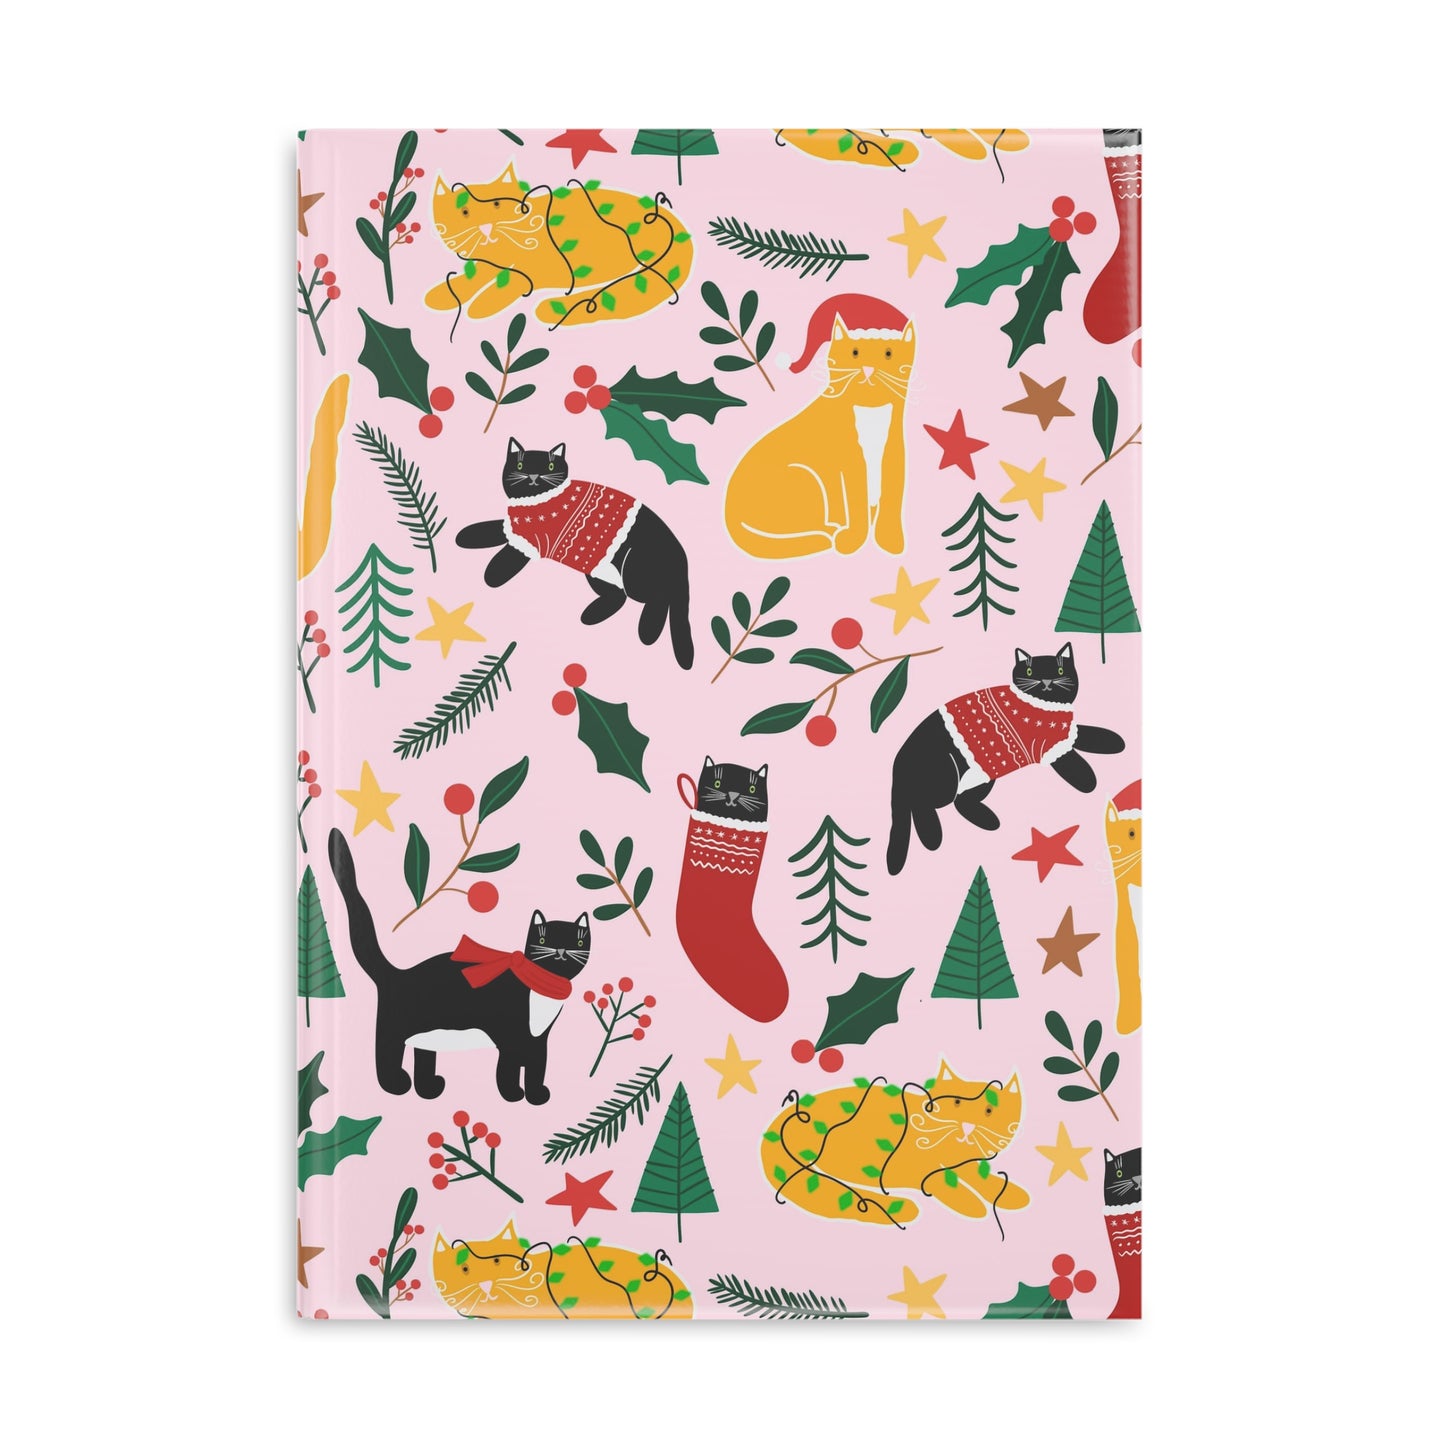 Hardcover Notebook with Puffy Covers A4 - Joulukissat / Christmas Cats - Notebooks- Print N Stuff - [designed in Turku Finland]